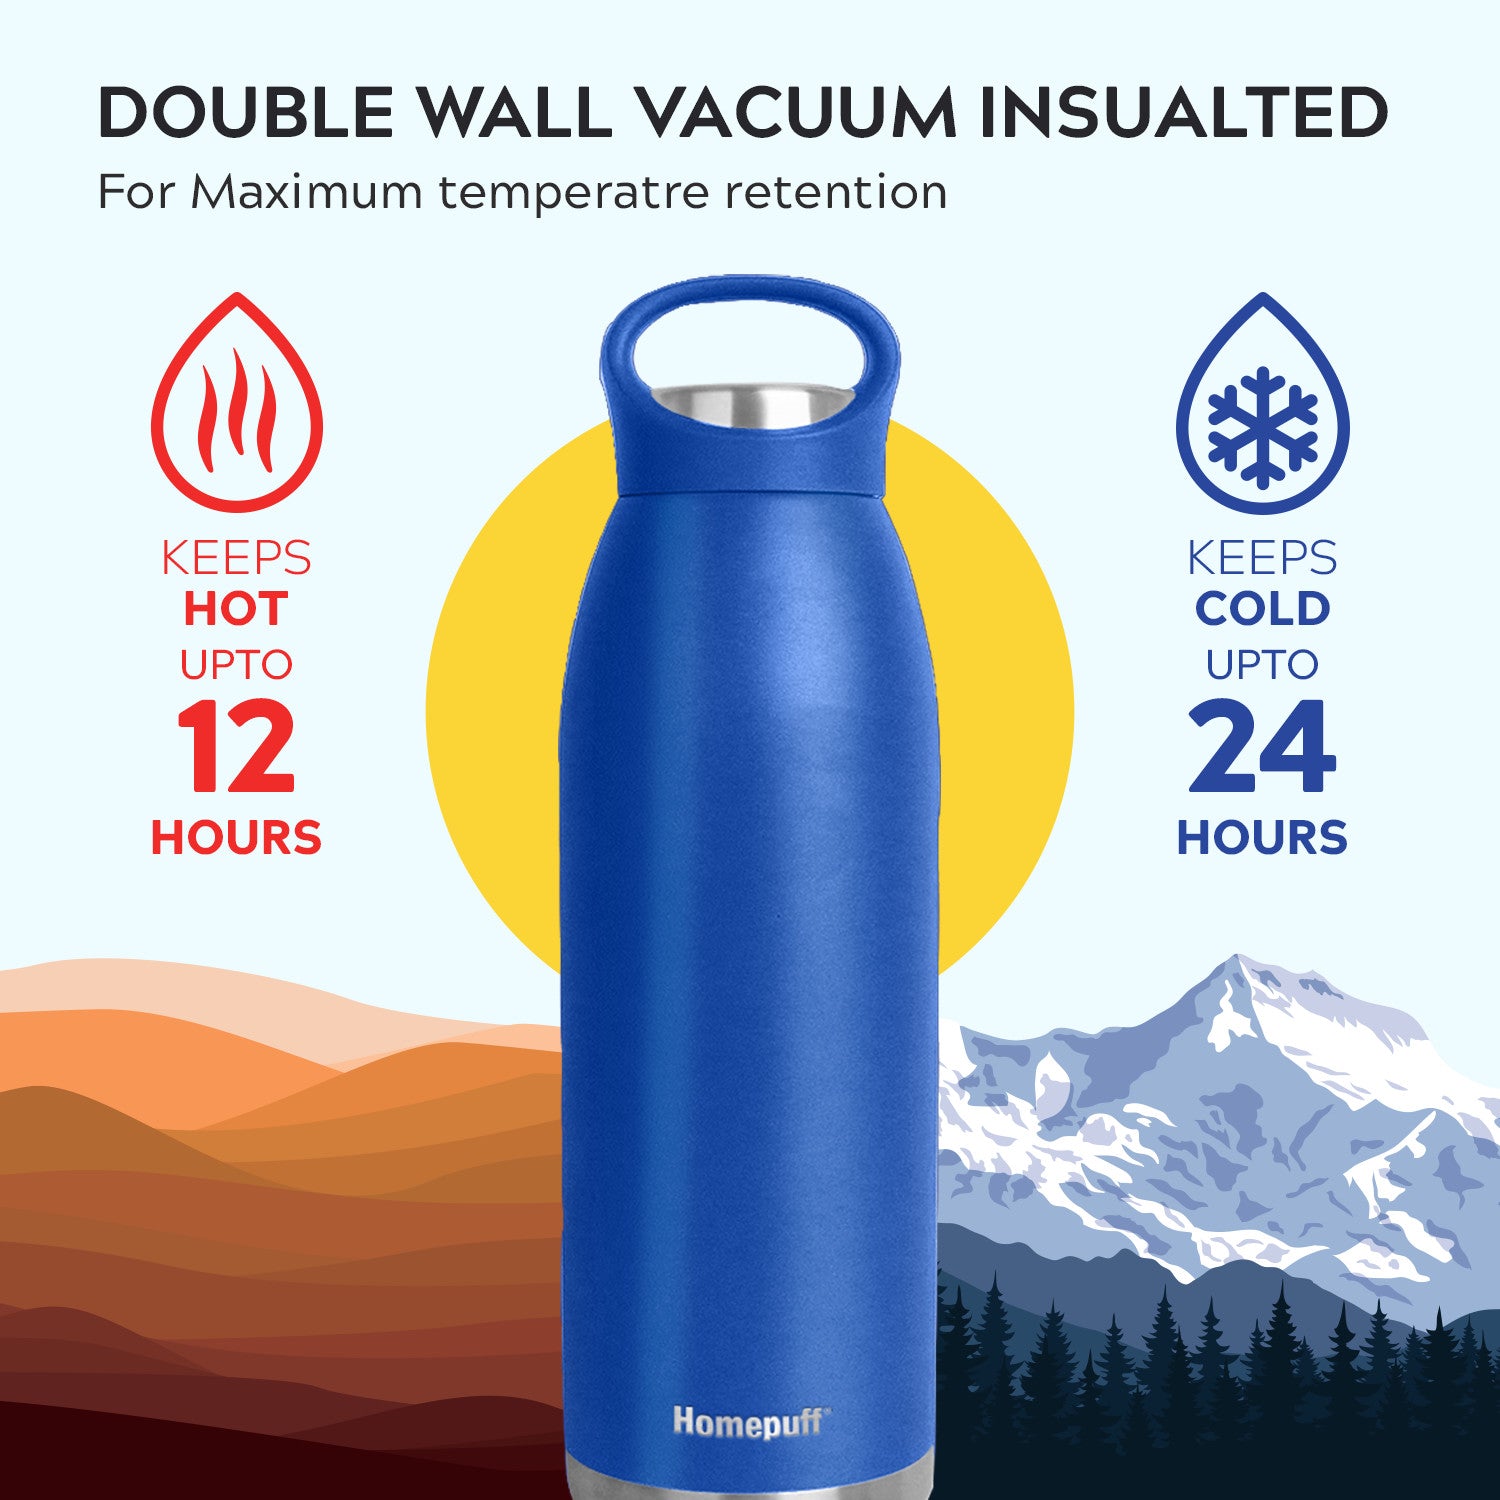 NEW OASIS DRINK BOTTLE 1 LITRE Double Wall Insulated Thermal Hot Cold Flask